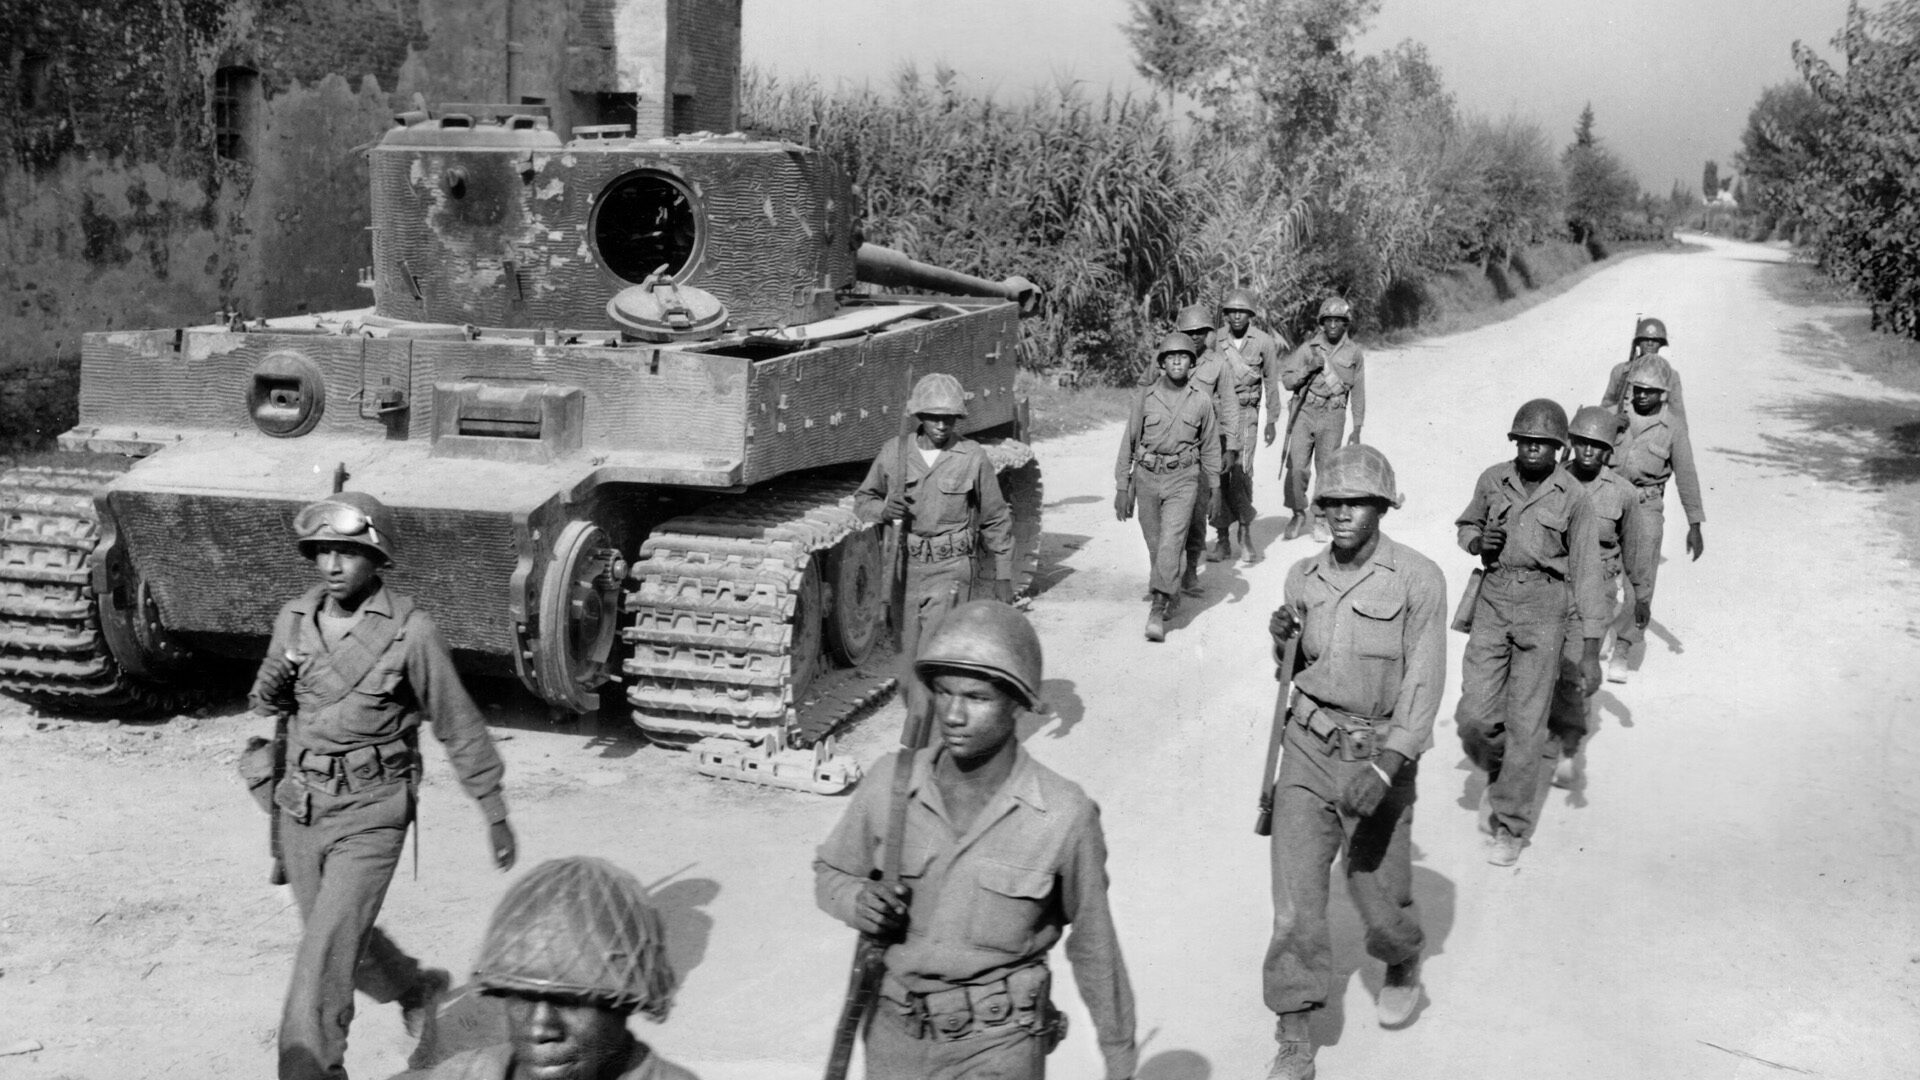 Fighting men of the 92nd Infantry Division, the famed Buffalo Soldiers, march past the wreckage of a knocked out PzKpfw. VI Tiger tank in the vicinity of Ponsacco, Italy. The African-American soldiers of the 92nd Division fought racial injustice in their own army, as well as the Germans.